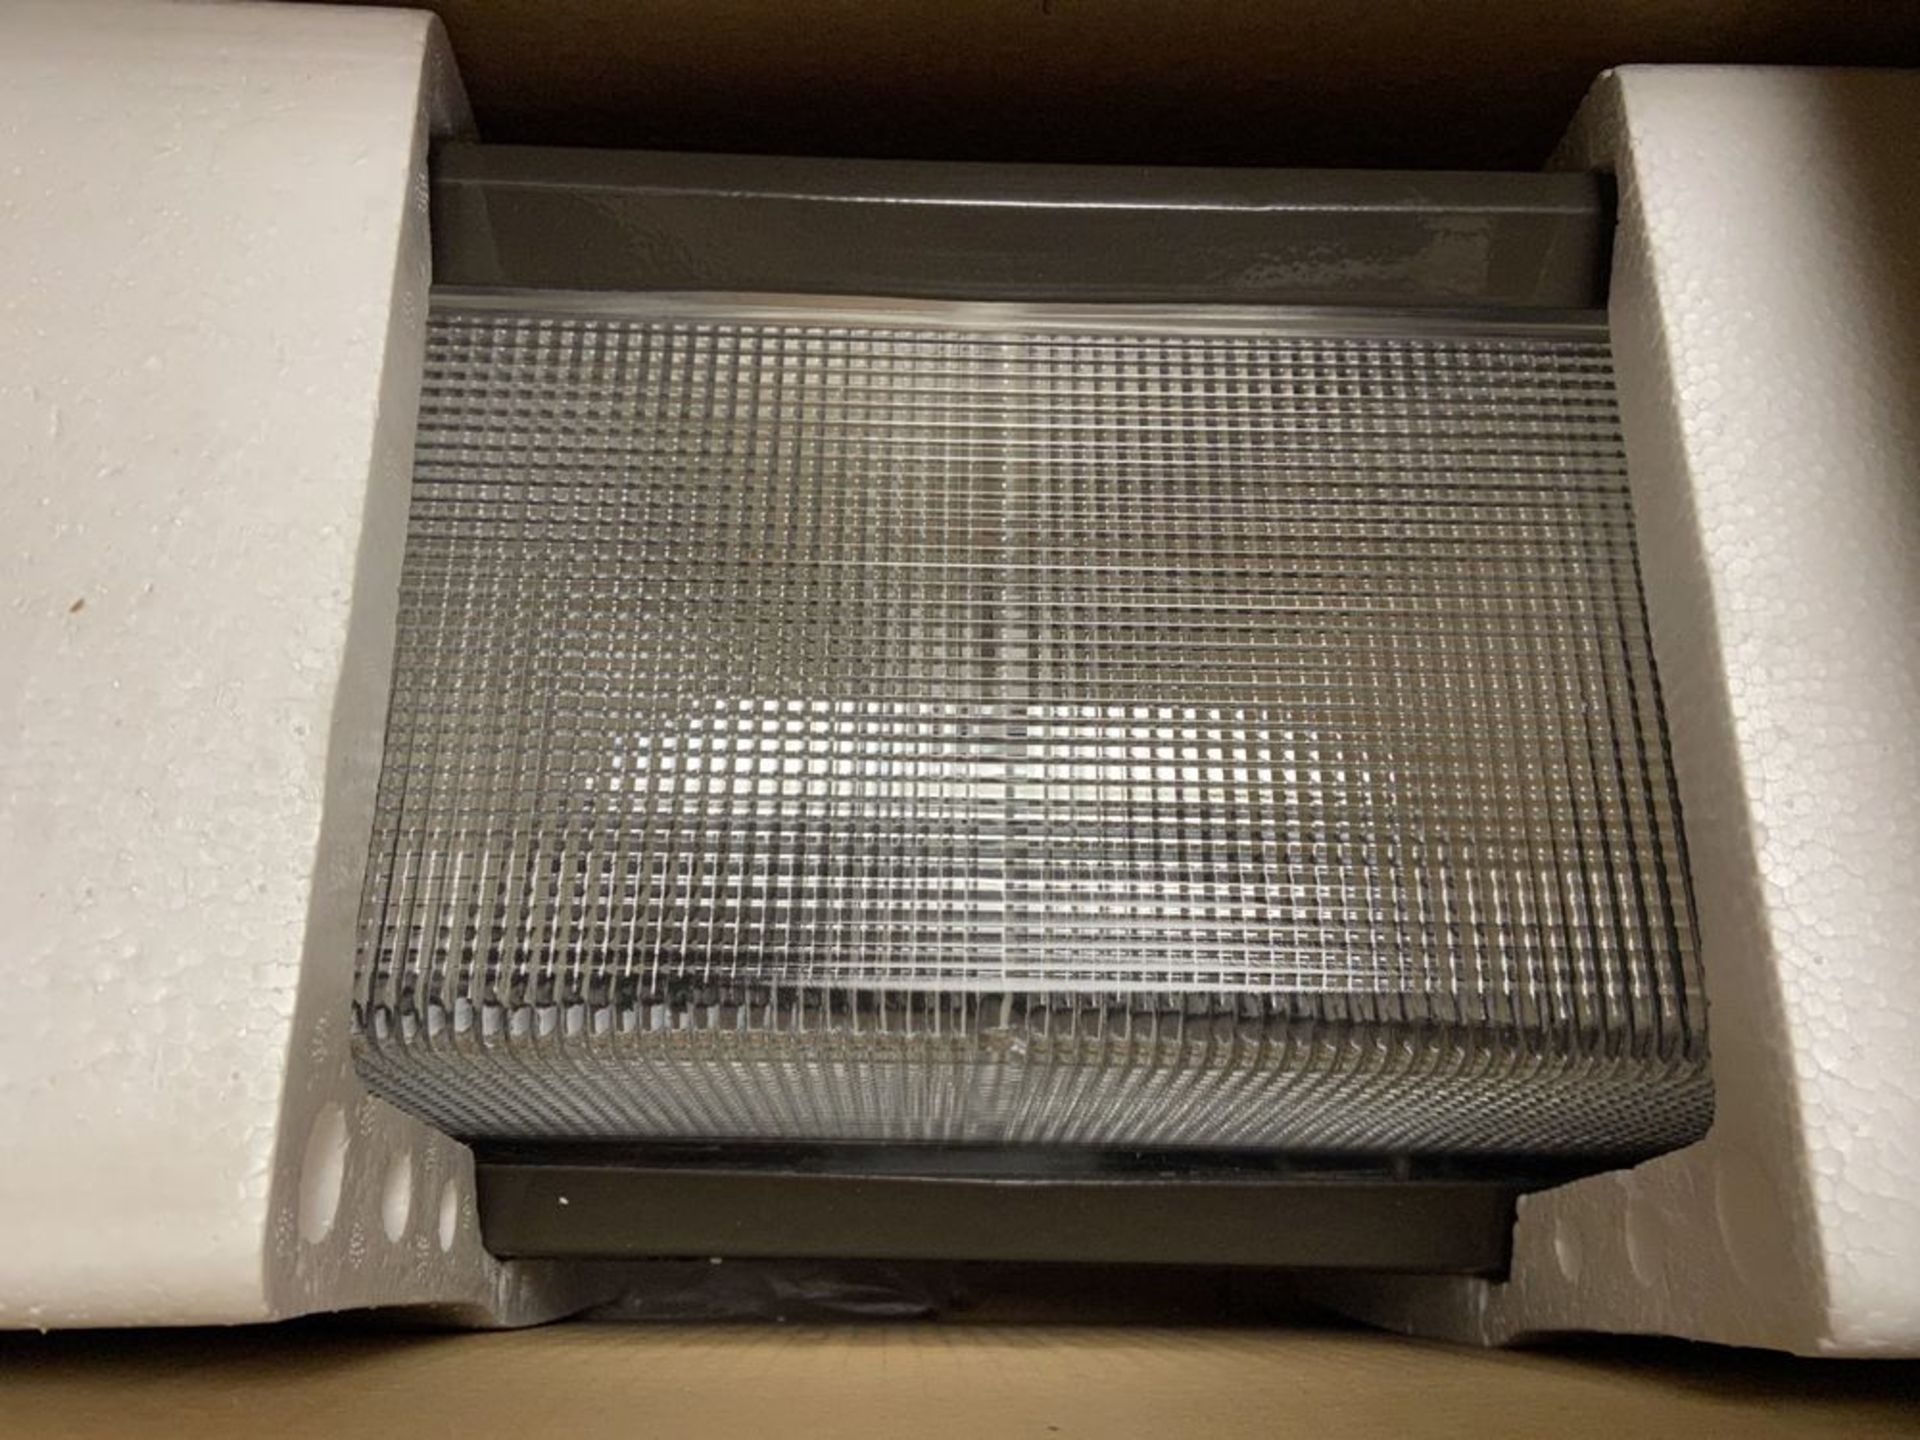 4 New in Box - Nu Vue Induction Lighting Fixtures, NV-WP-VL85W, NV-GL-RT70W, NV-RL-RT70W - Image 3 of 4